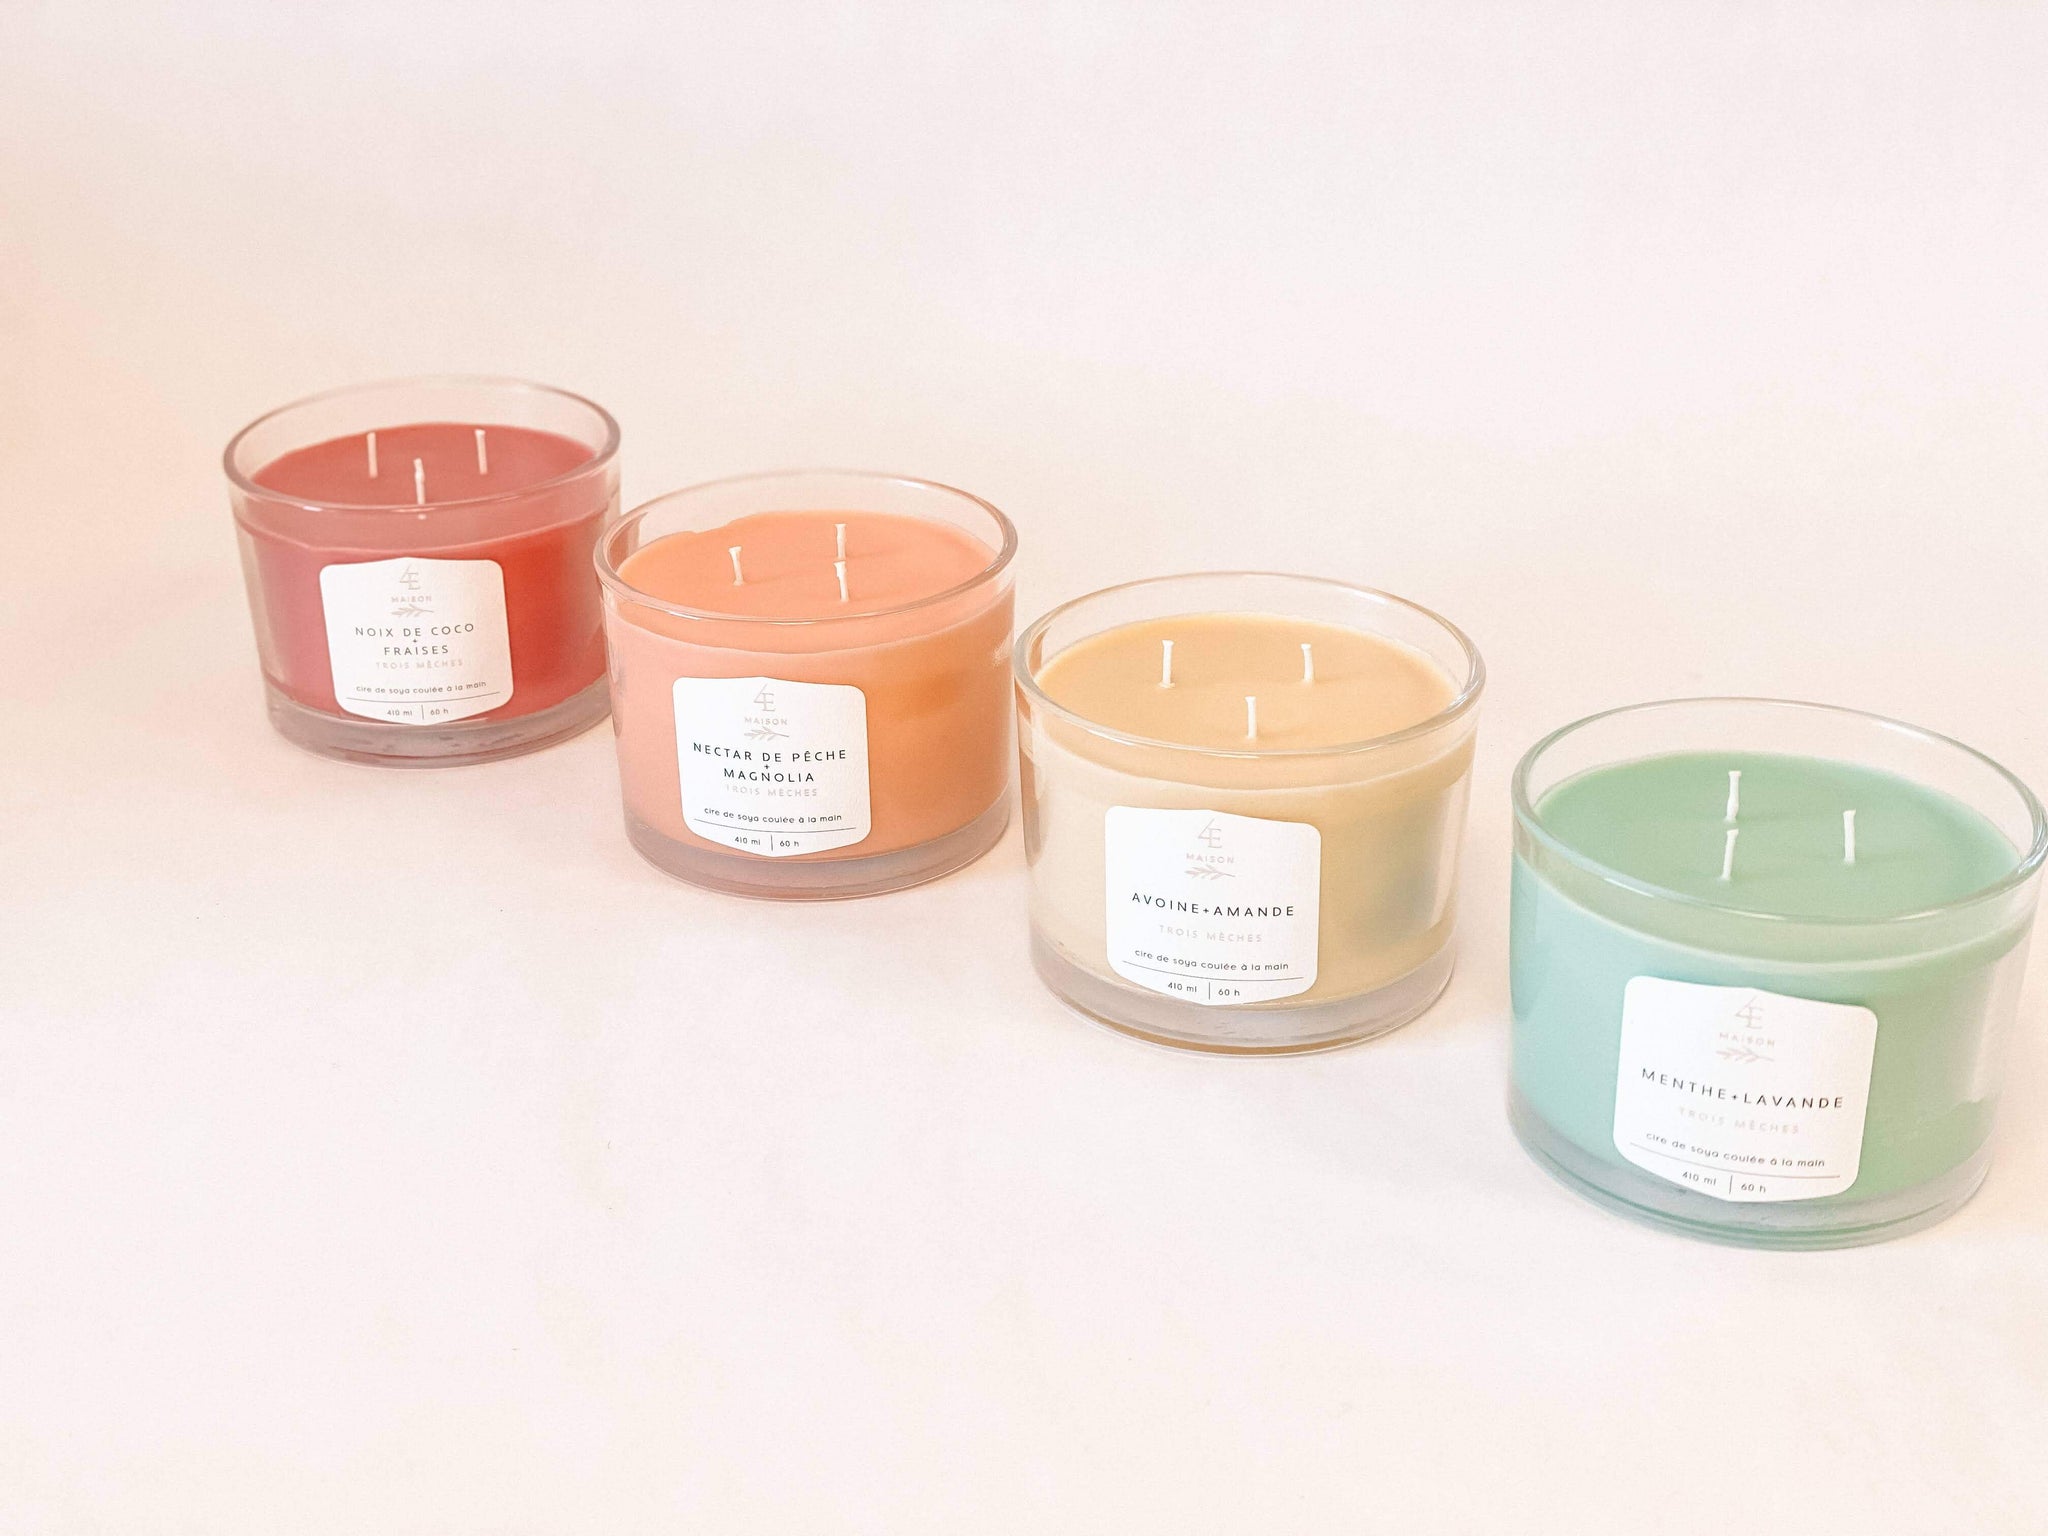 Large format 3-wick candles